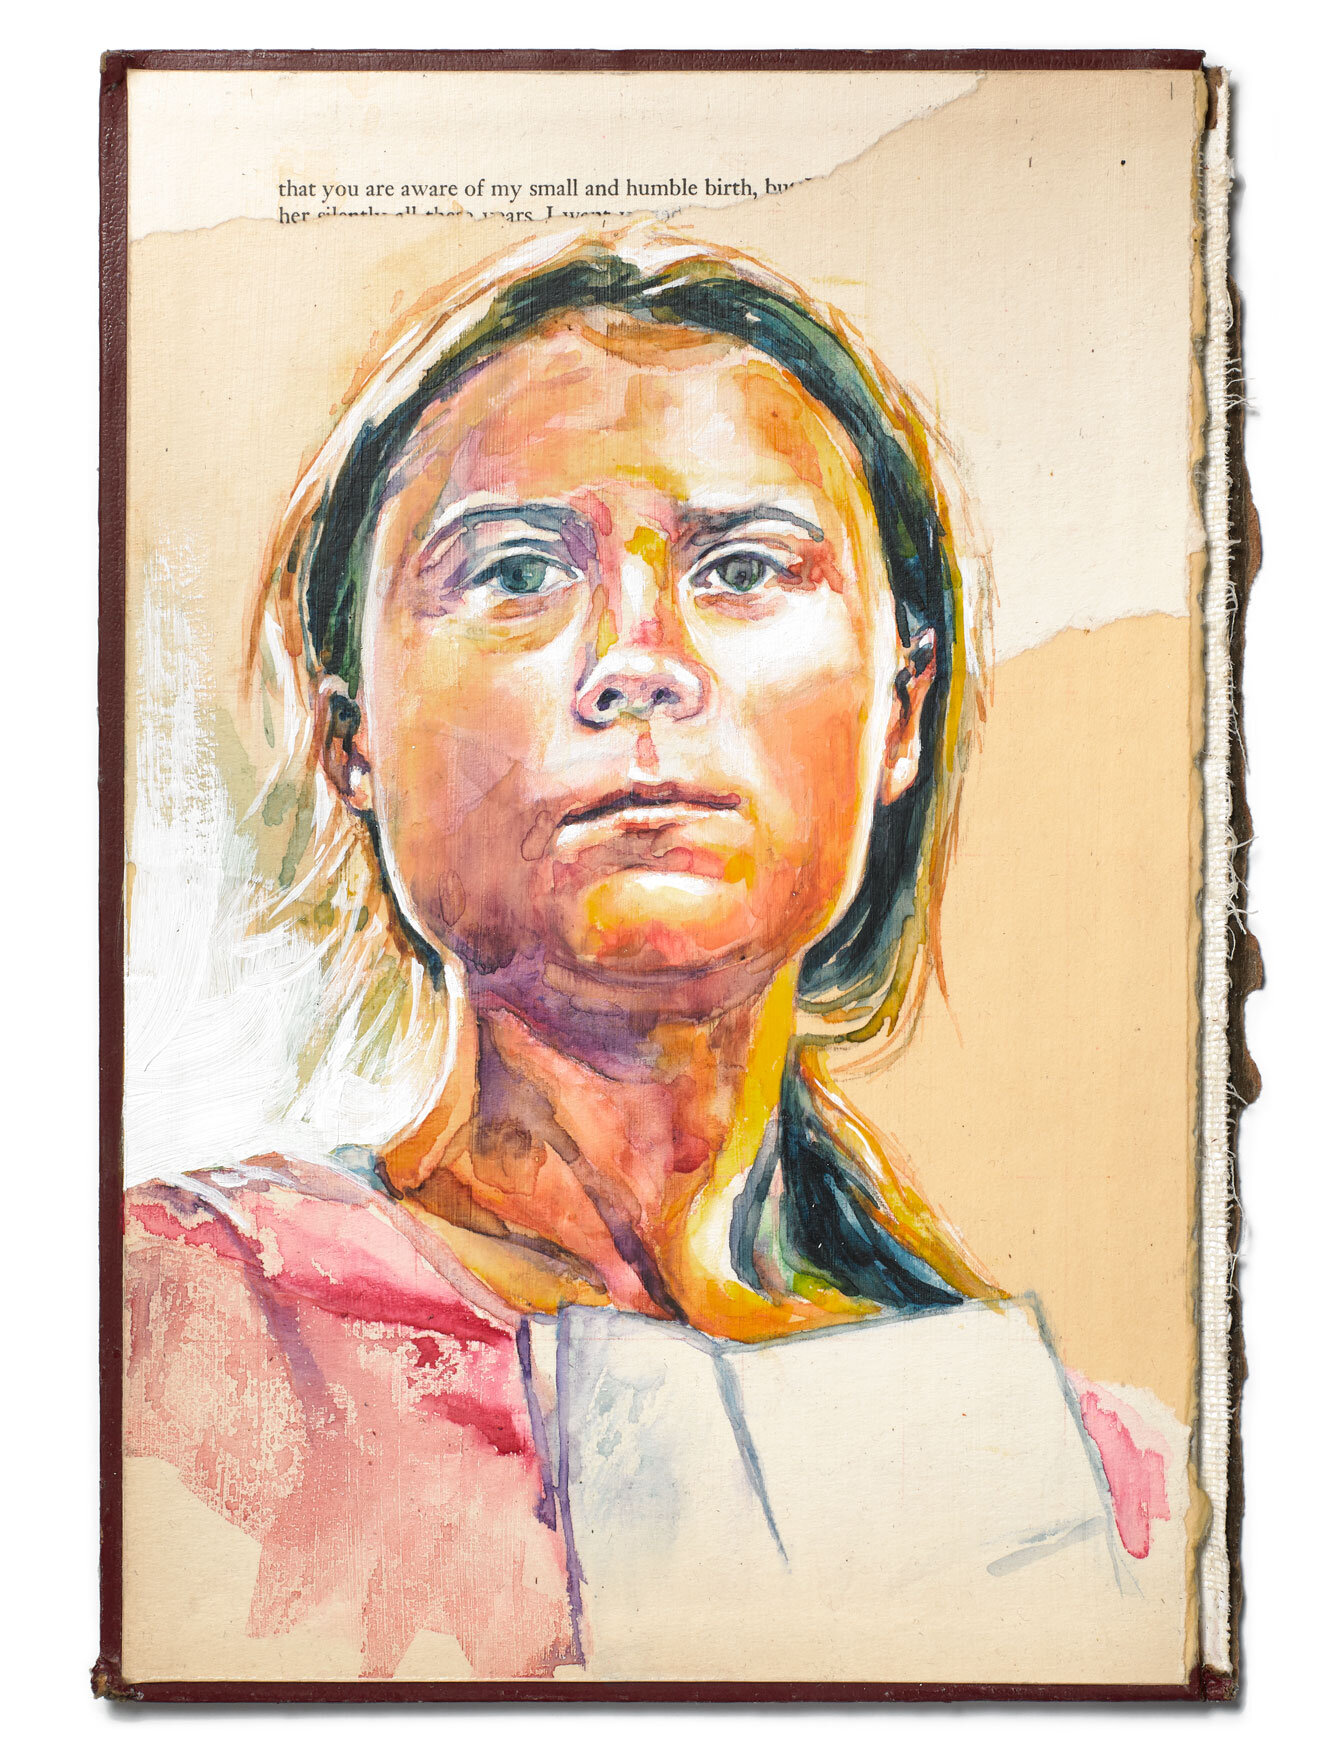    RESIST Portrait: Literary Series, That You Are Aware   Watercolor on Book Cover 7in x 10.25in (Framed 11in x 14in) 